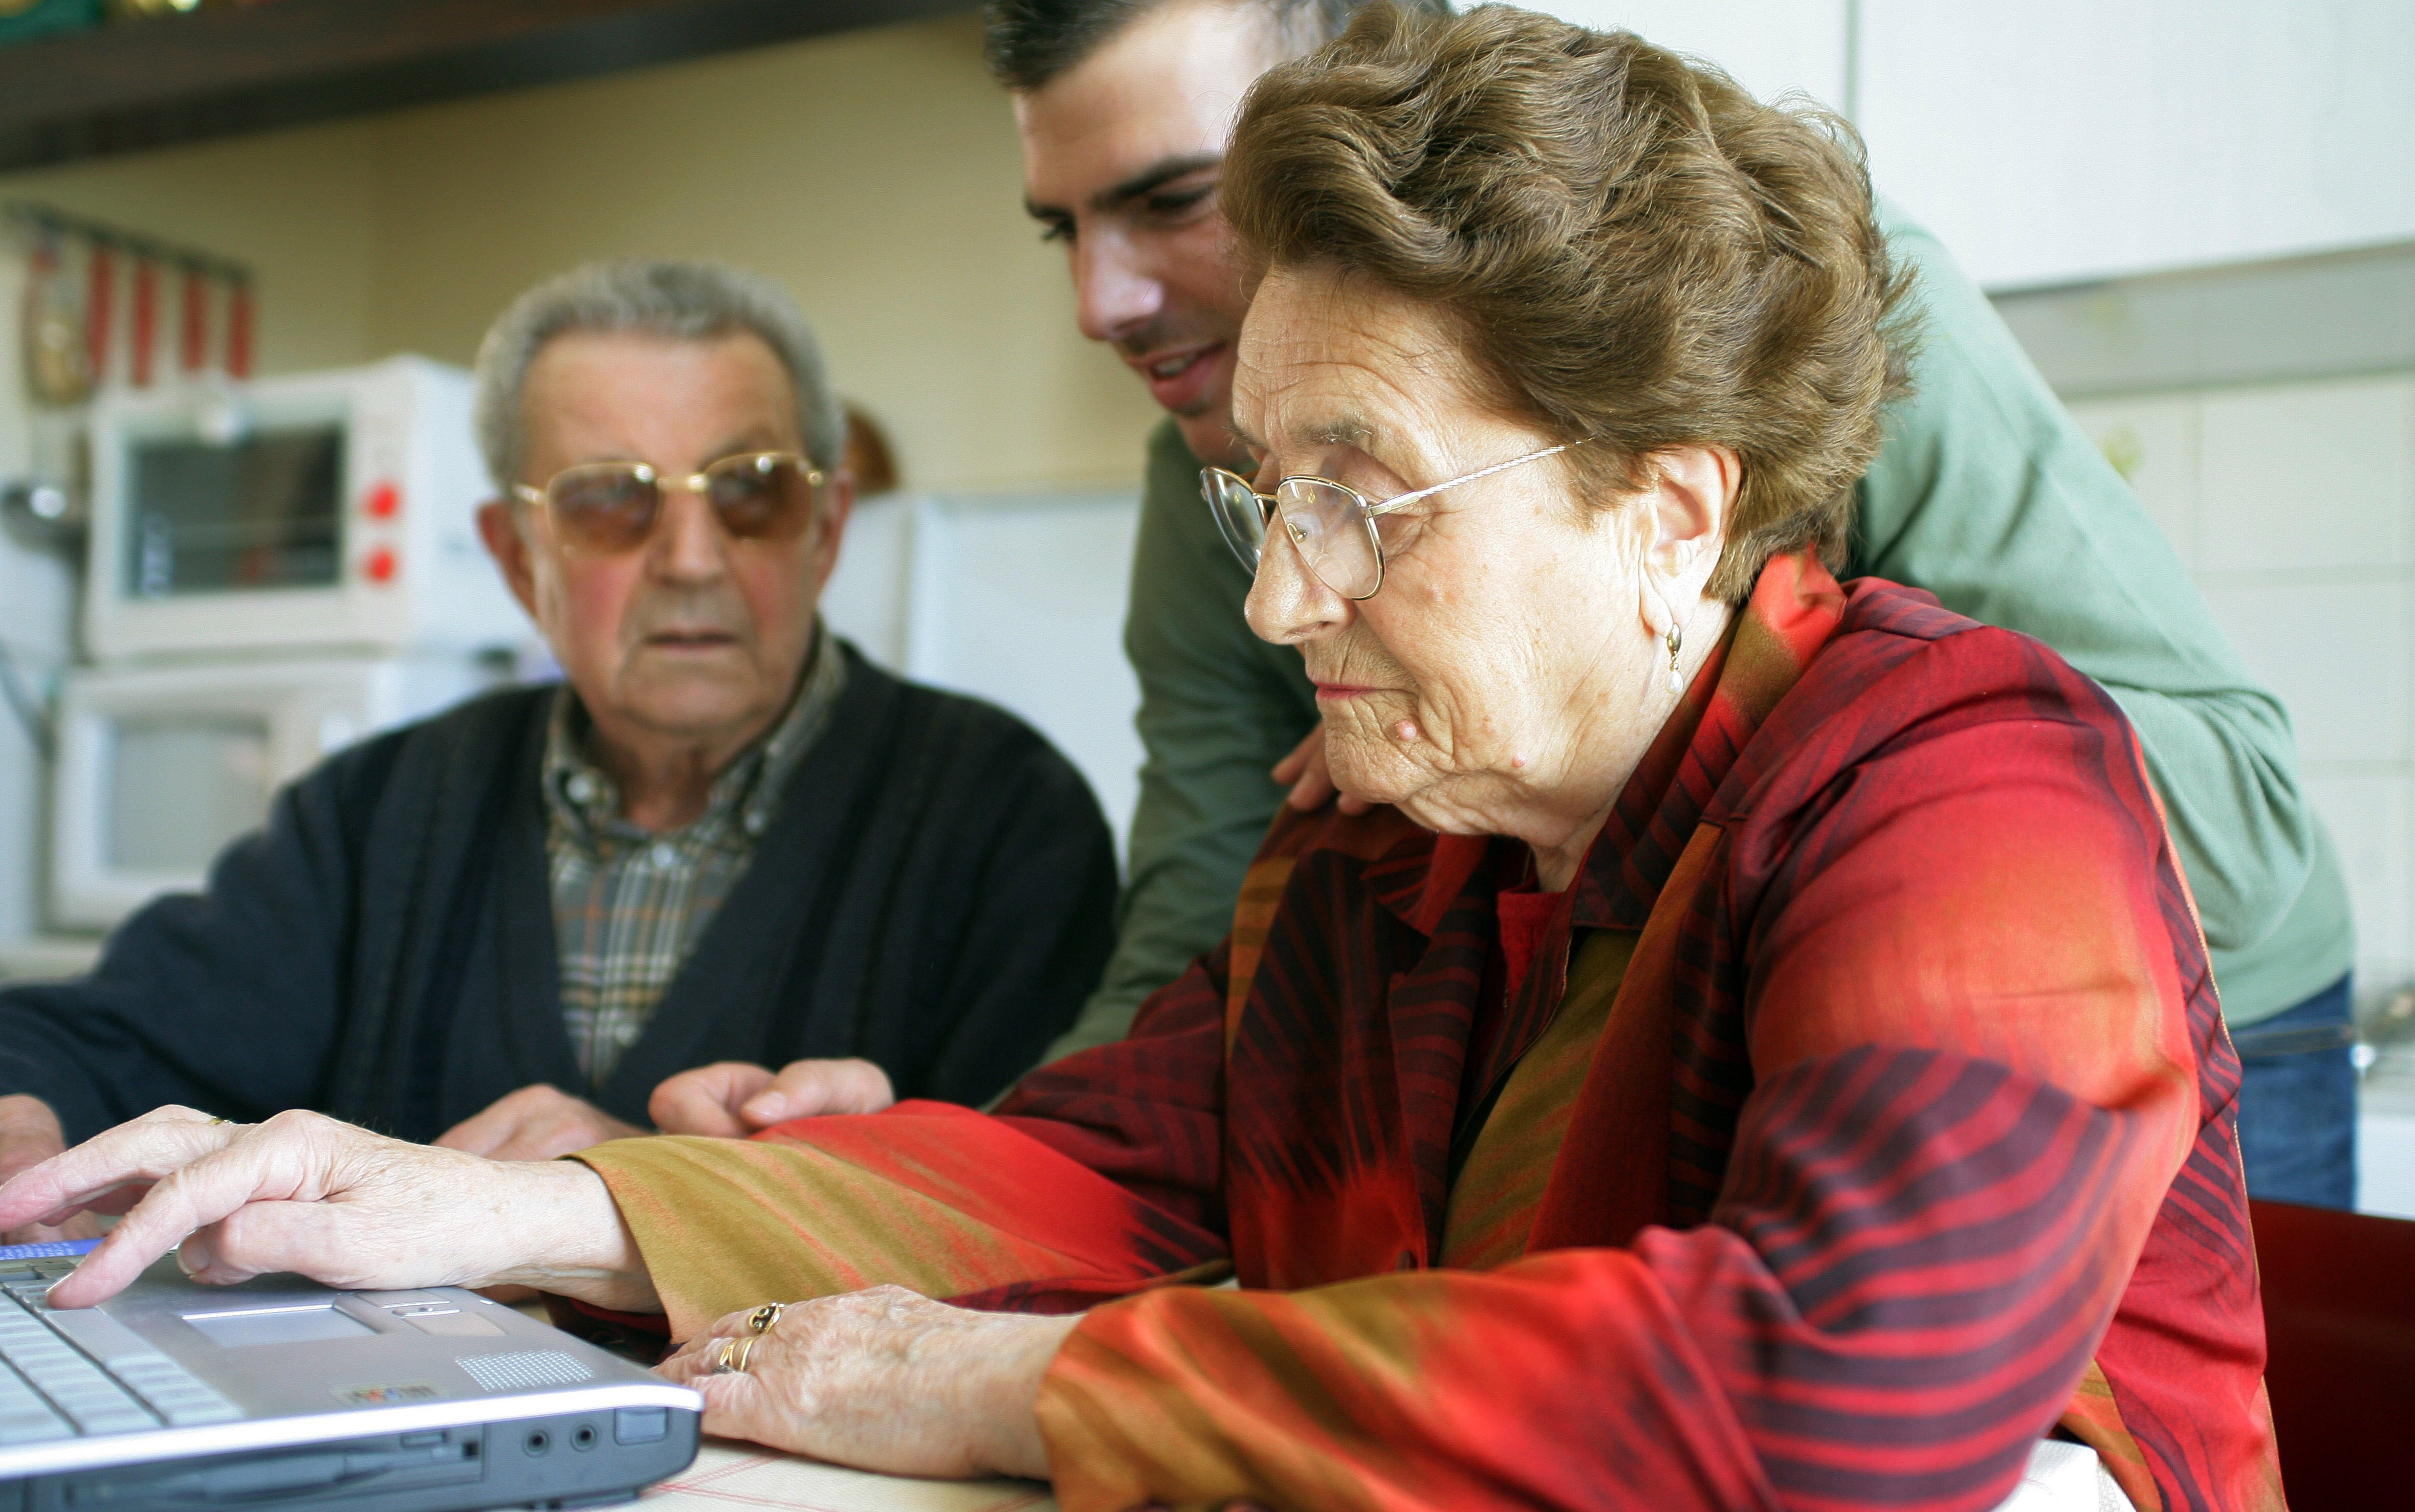 A photograph of a senior woman and a senior man sat down. They are being helped to use the laptop in front of them by a younger man standing in between them who is looking at the laptop screen.